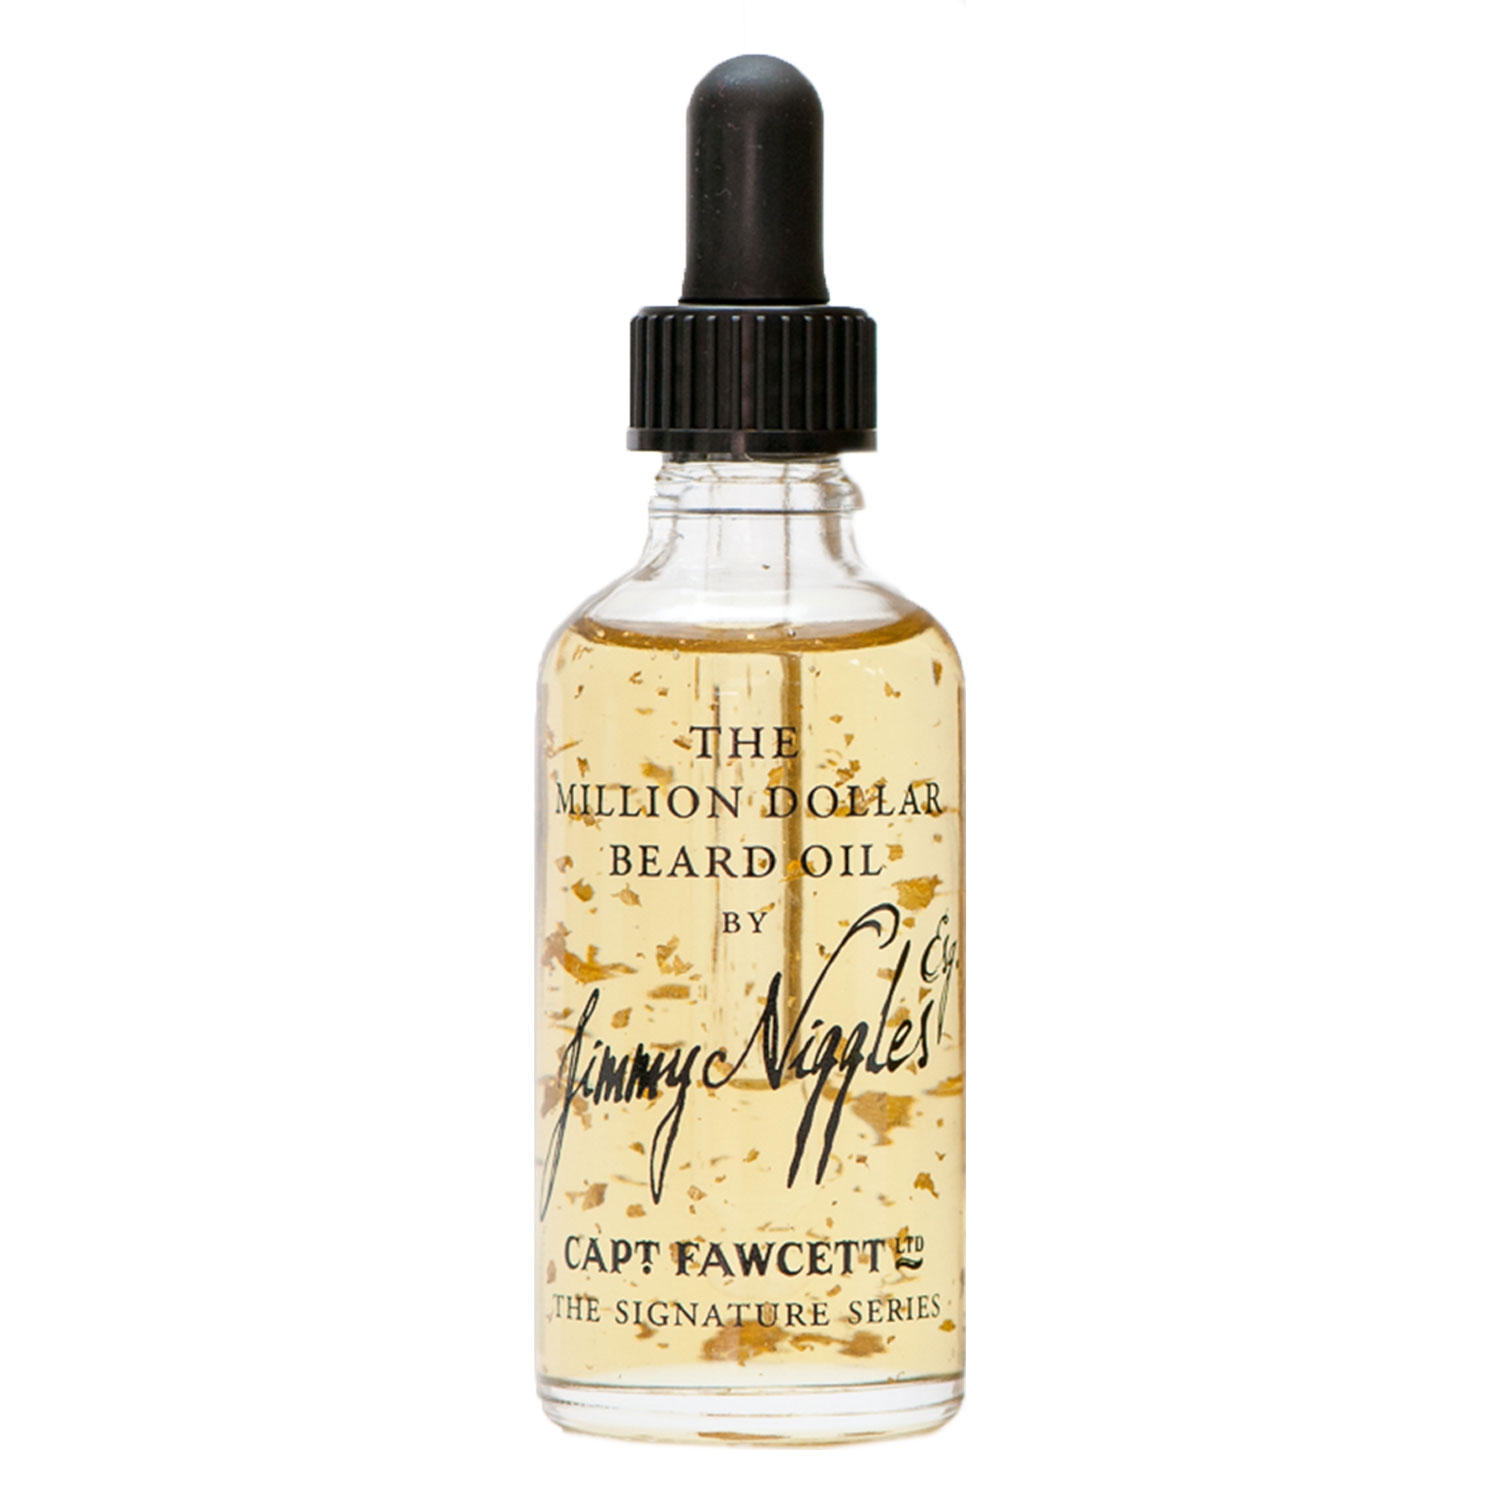 Product image from Capt. Fawcett Care - Jimmy Niggels Beard Oil